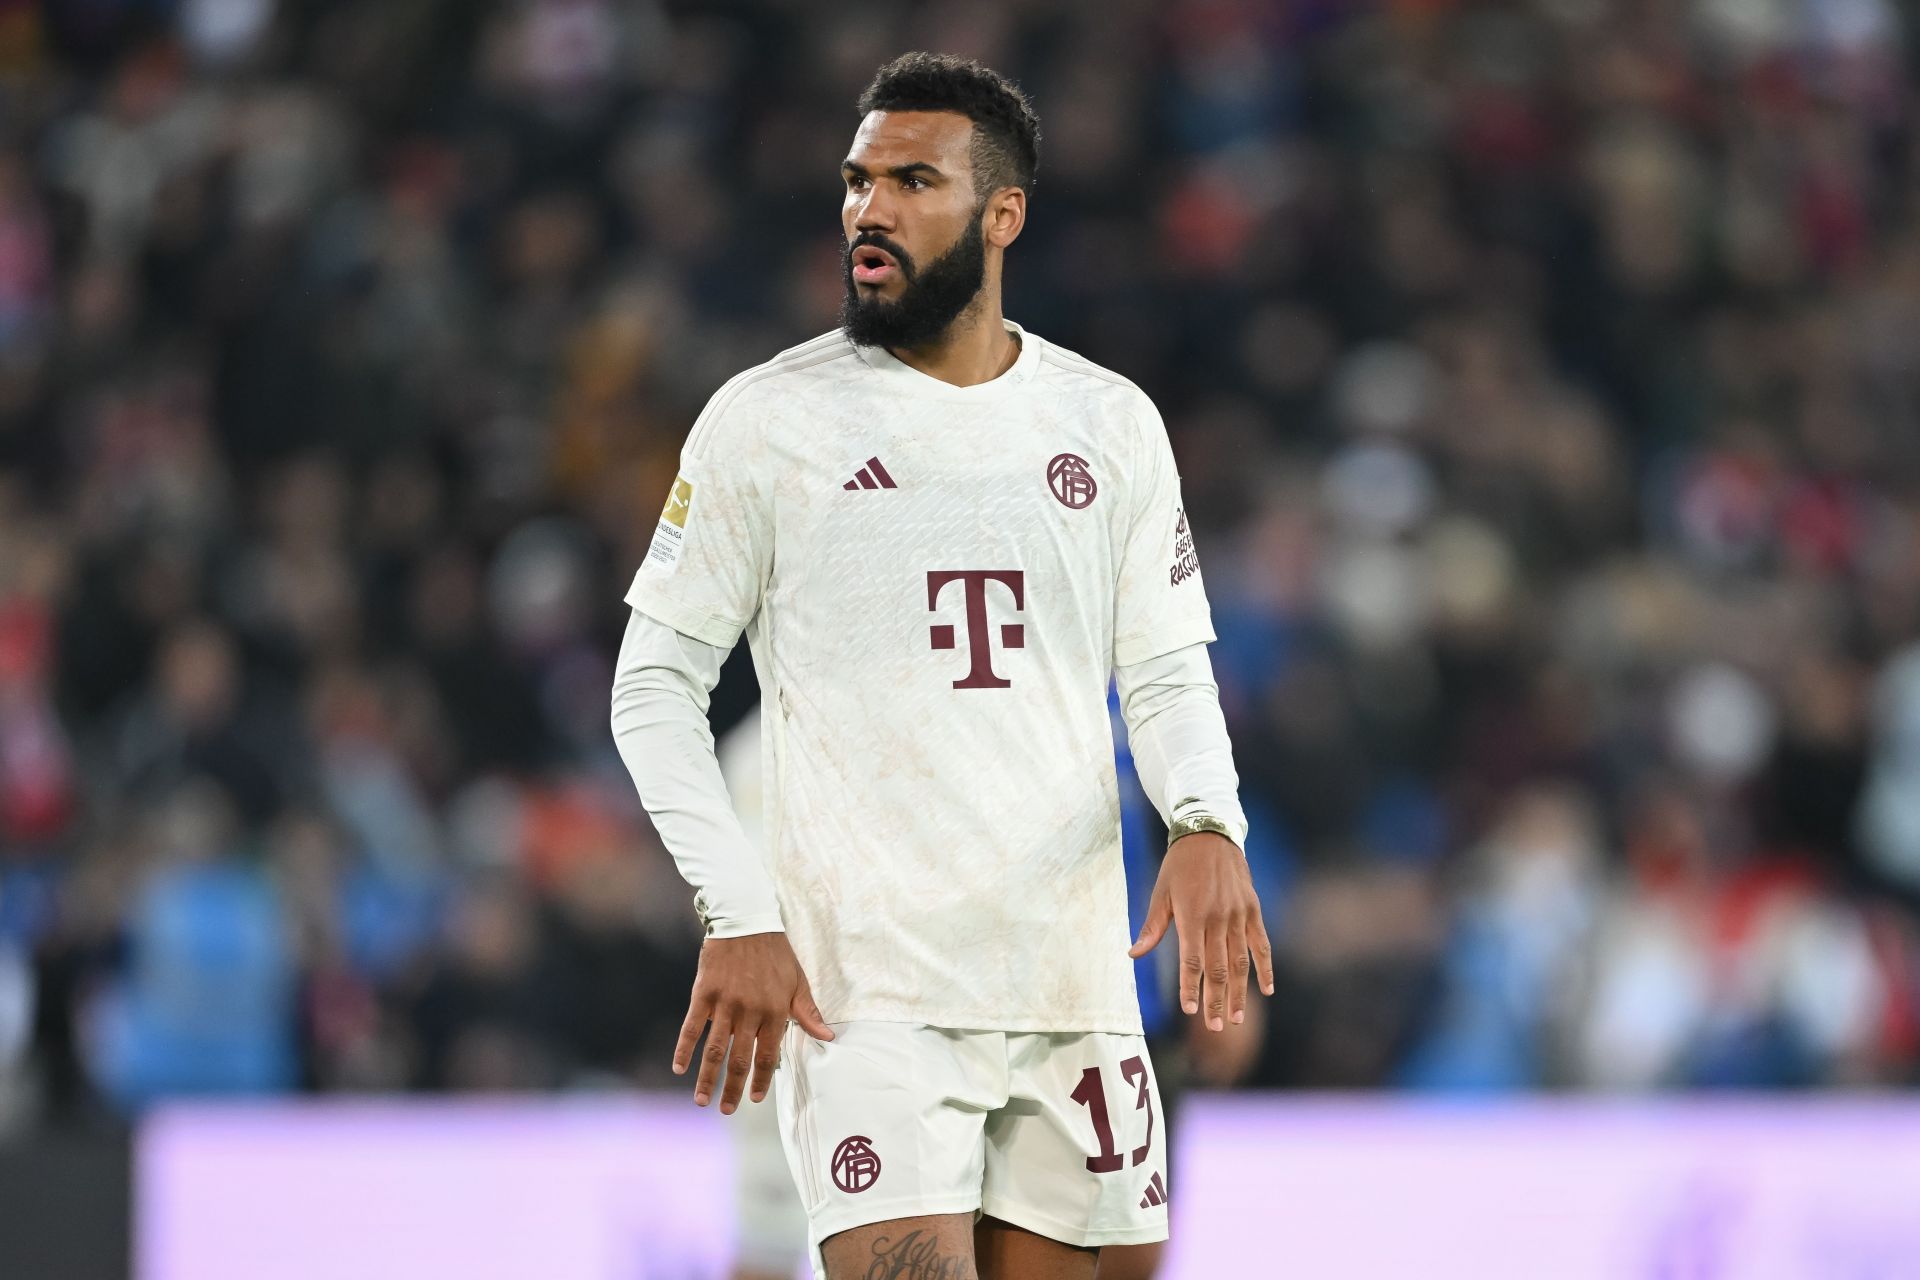 Eric Choupo-Moting has admirers at Old Trafford